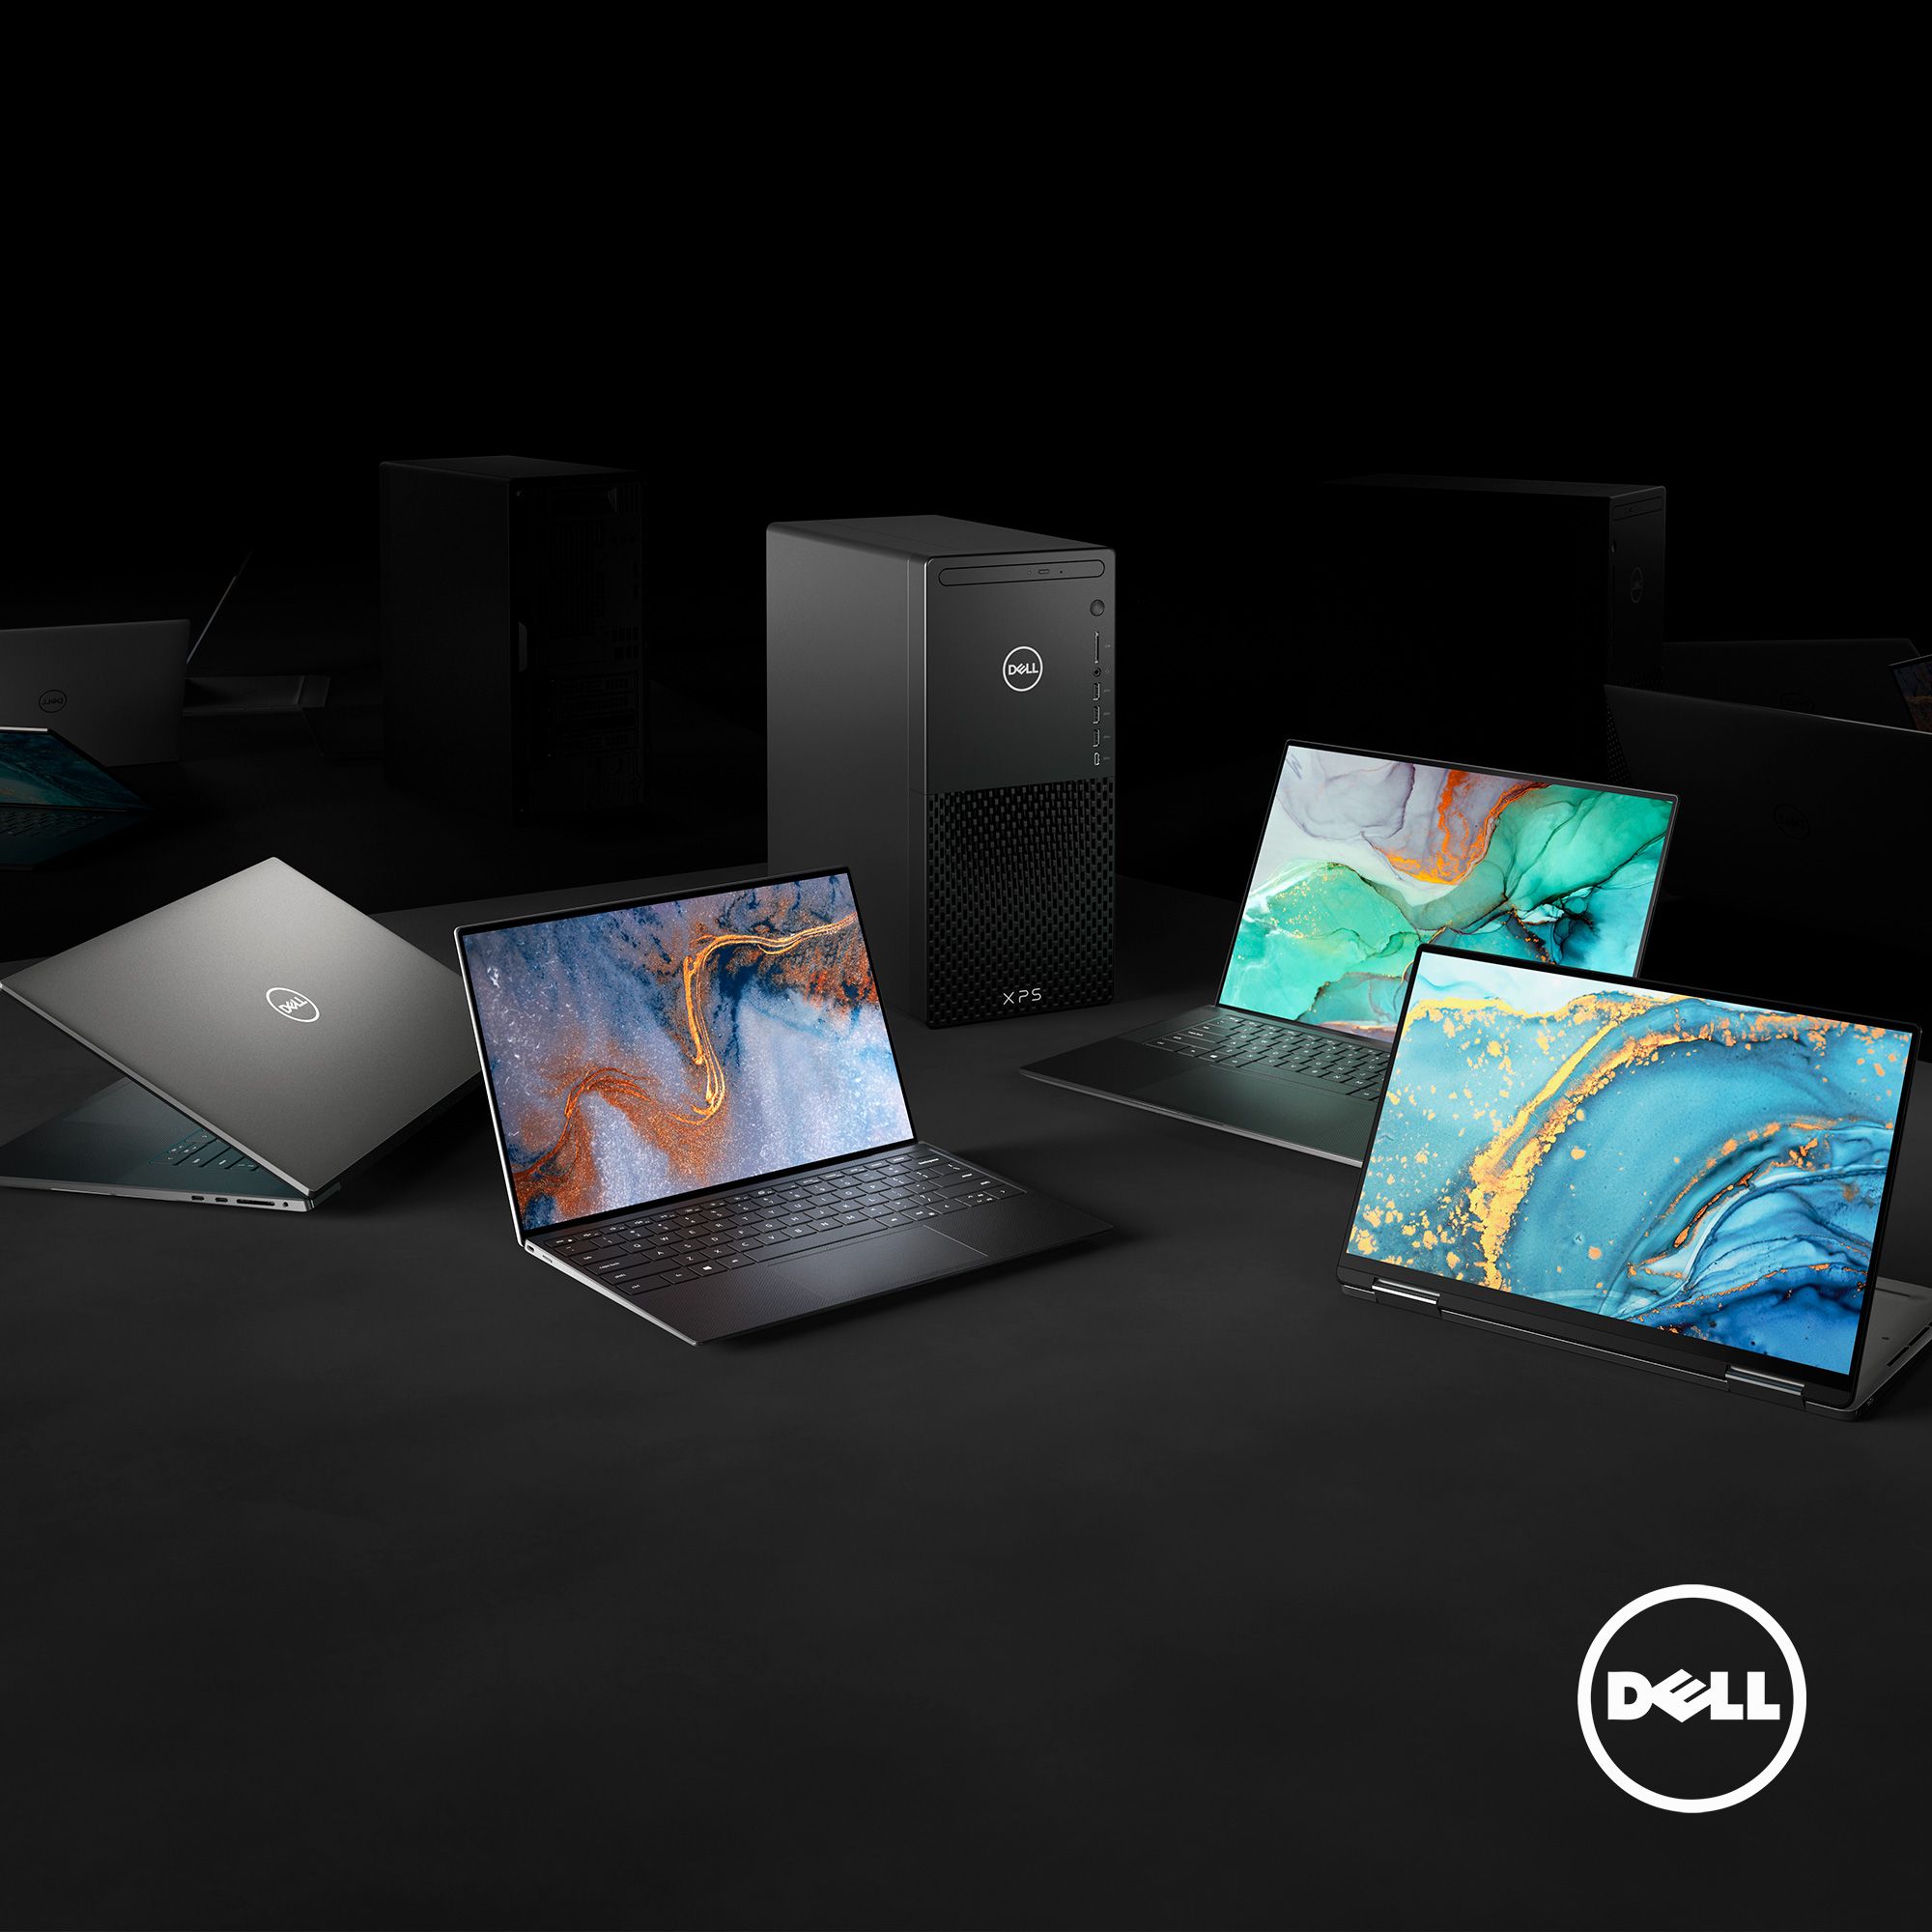 Discover the Dell XPS range